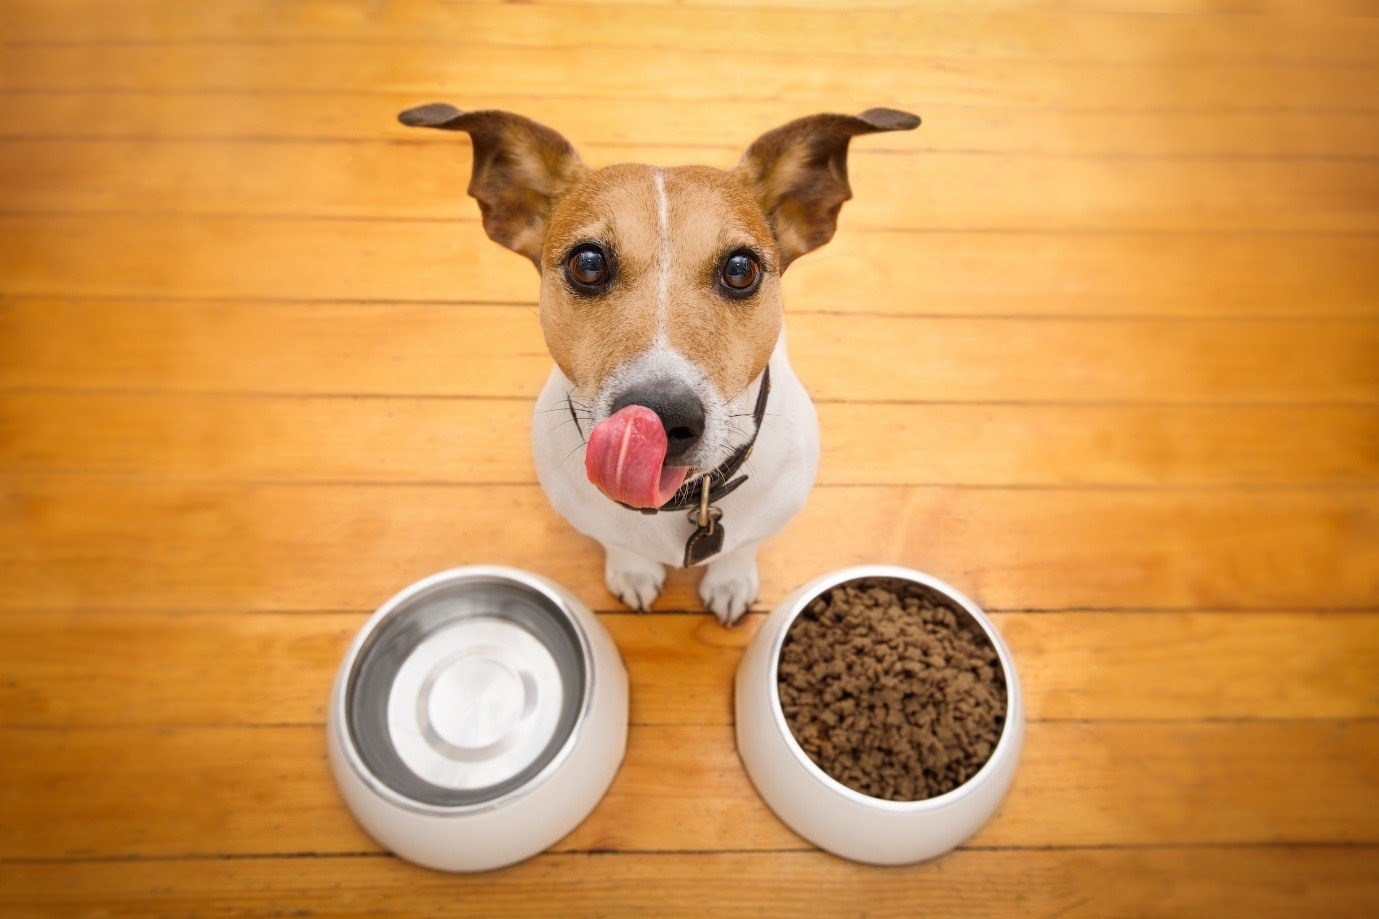 Why “eating your own dog food” will help you sell more vehicles